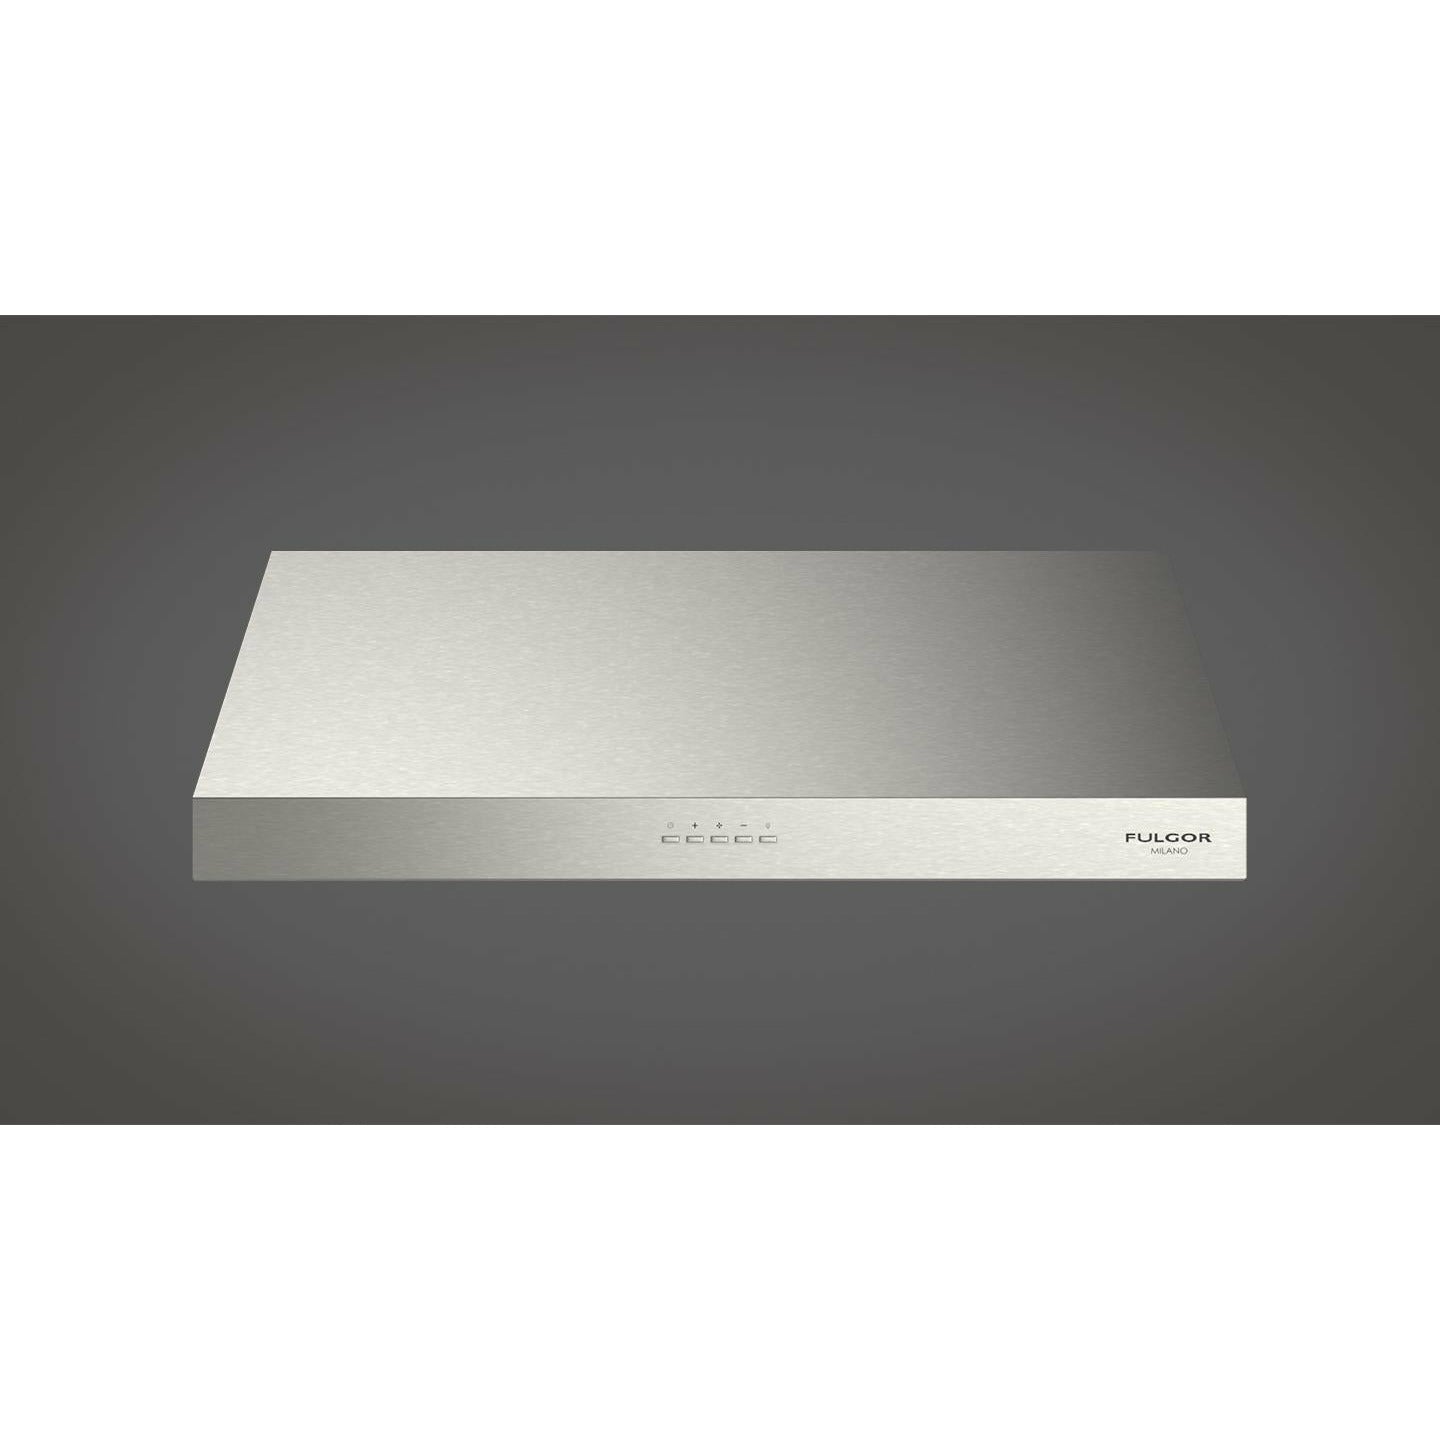 Fulgor Milano 30" Under Cabinet Range Hood with 4-Speed/450 CFM Blower, Stainless Steel - F4UC30S1 Hoods F4UC30S1 Luxury Appliances Direct